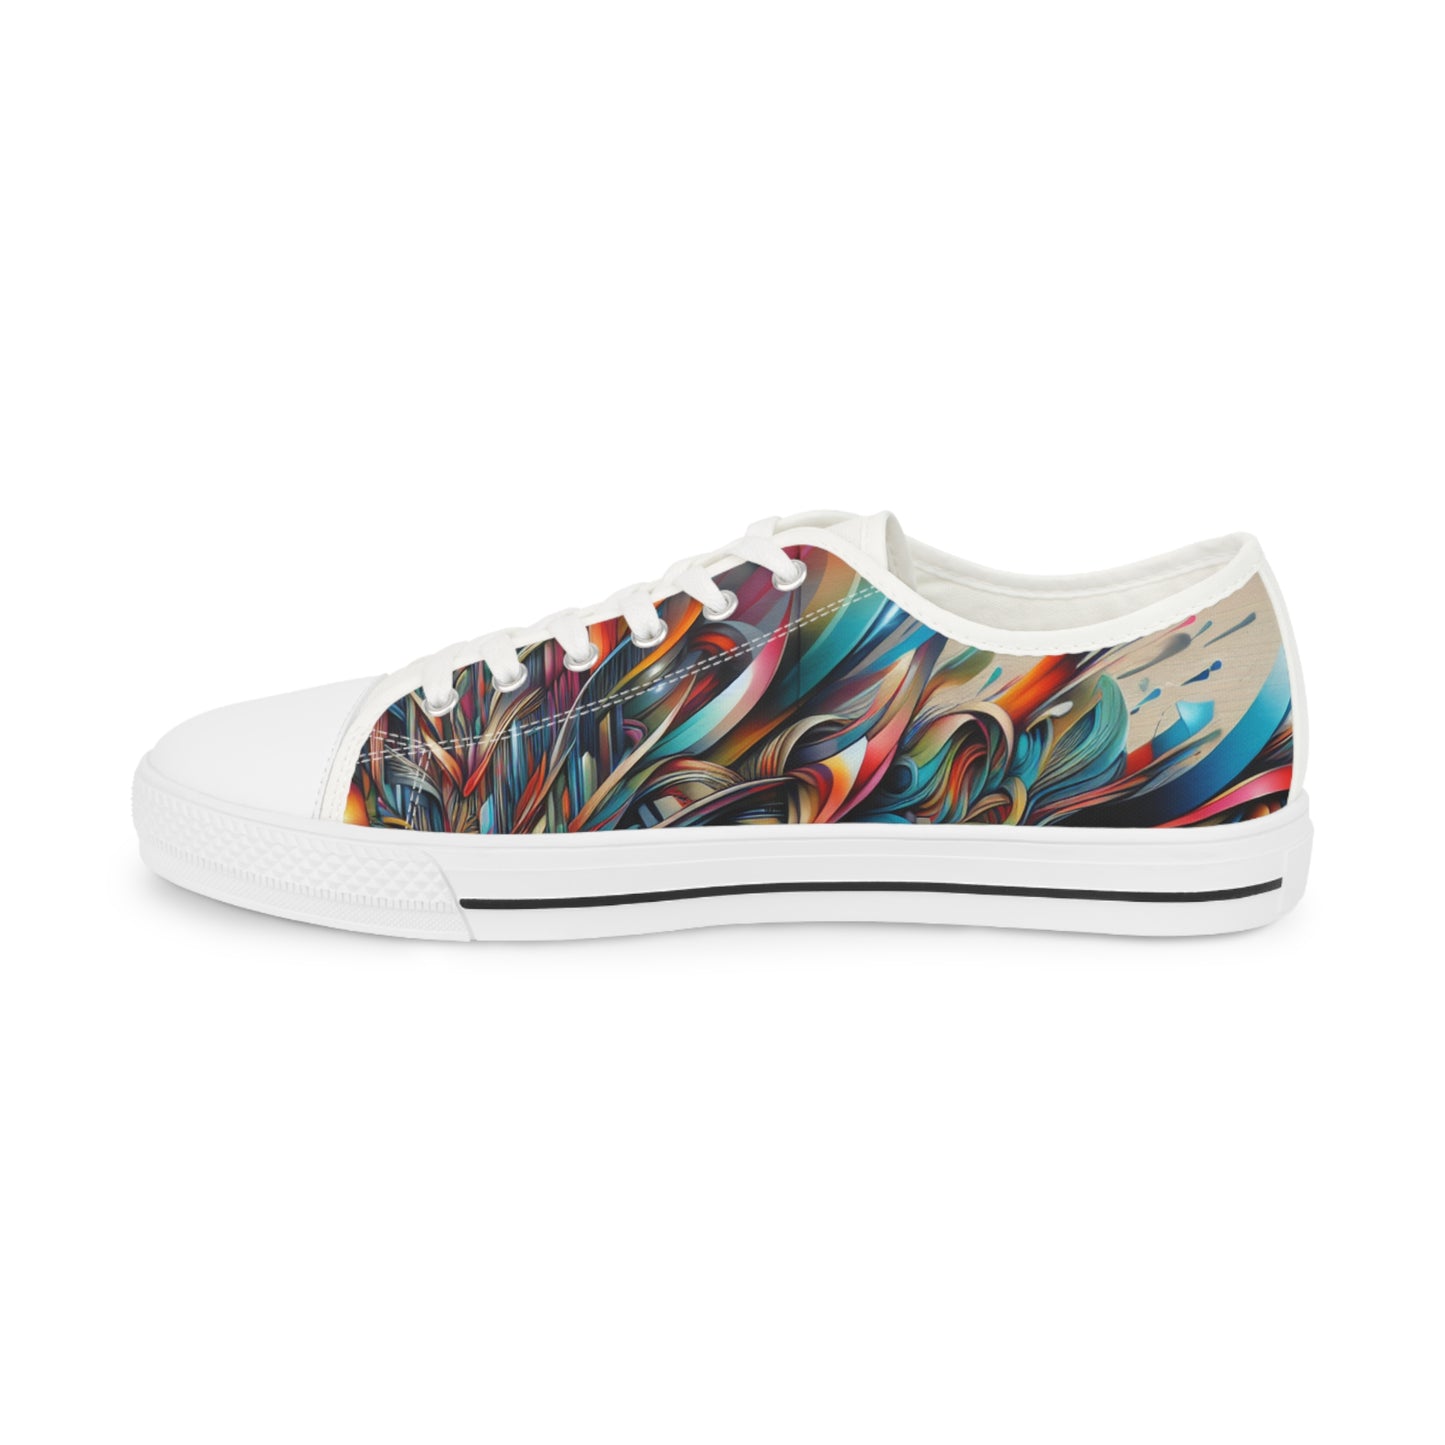 Isabella Firenze - Low Top Shoes